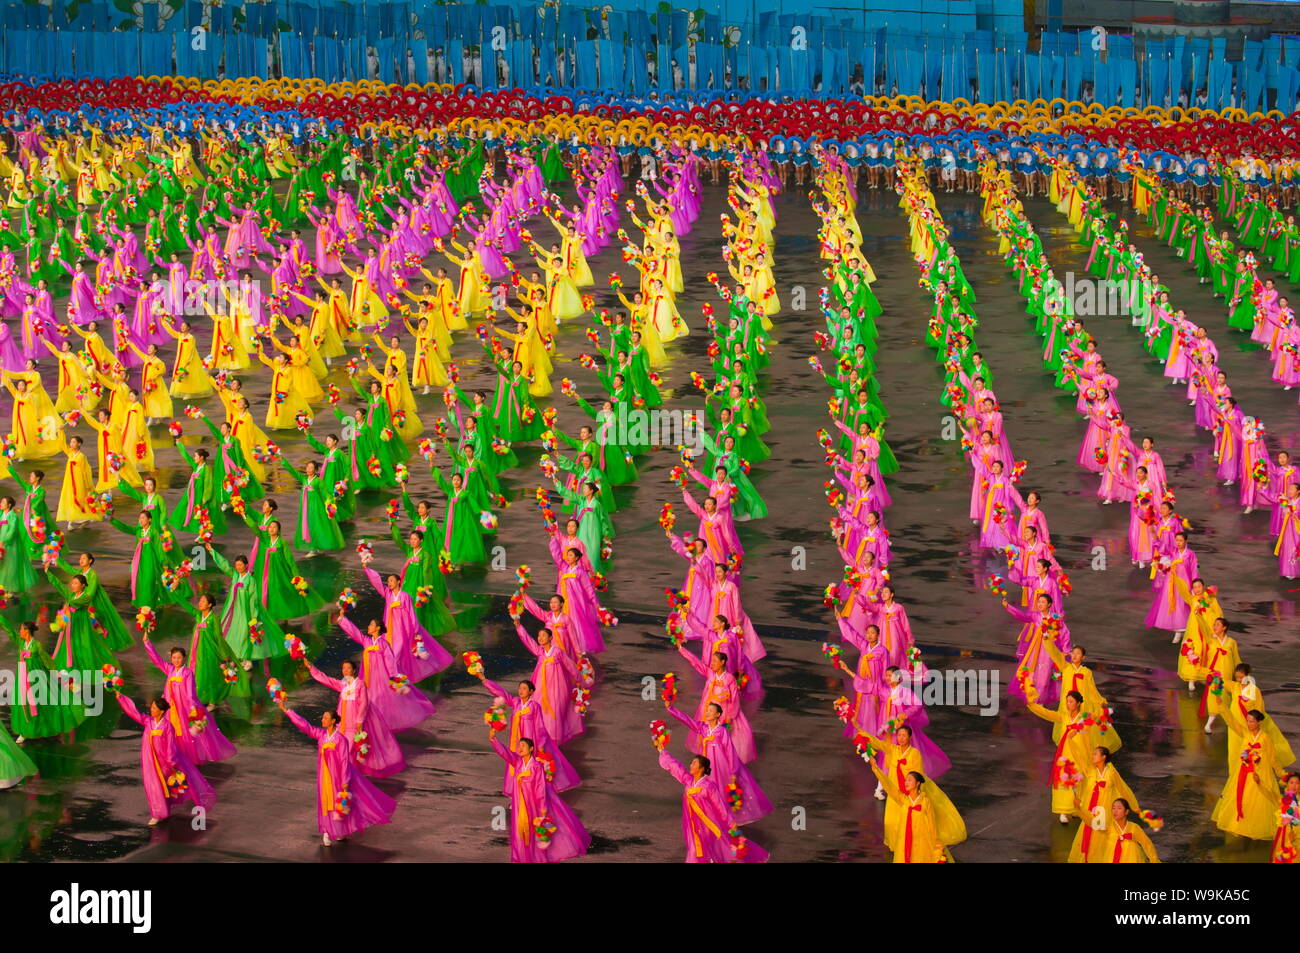 Dancers at the Airand festival, Mass games in Pyongyang, North Korea, Asia Stock Photo